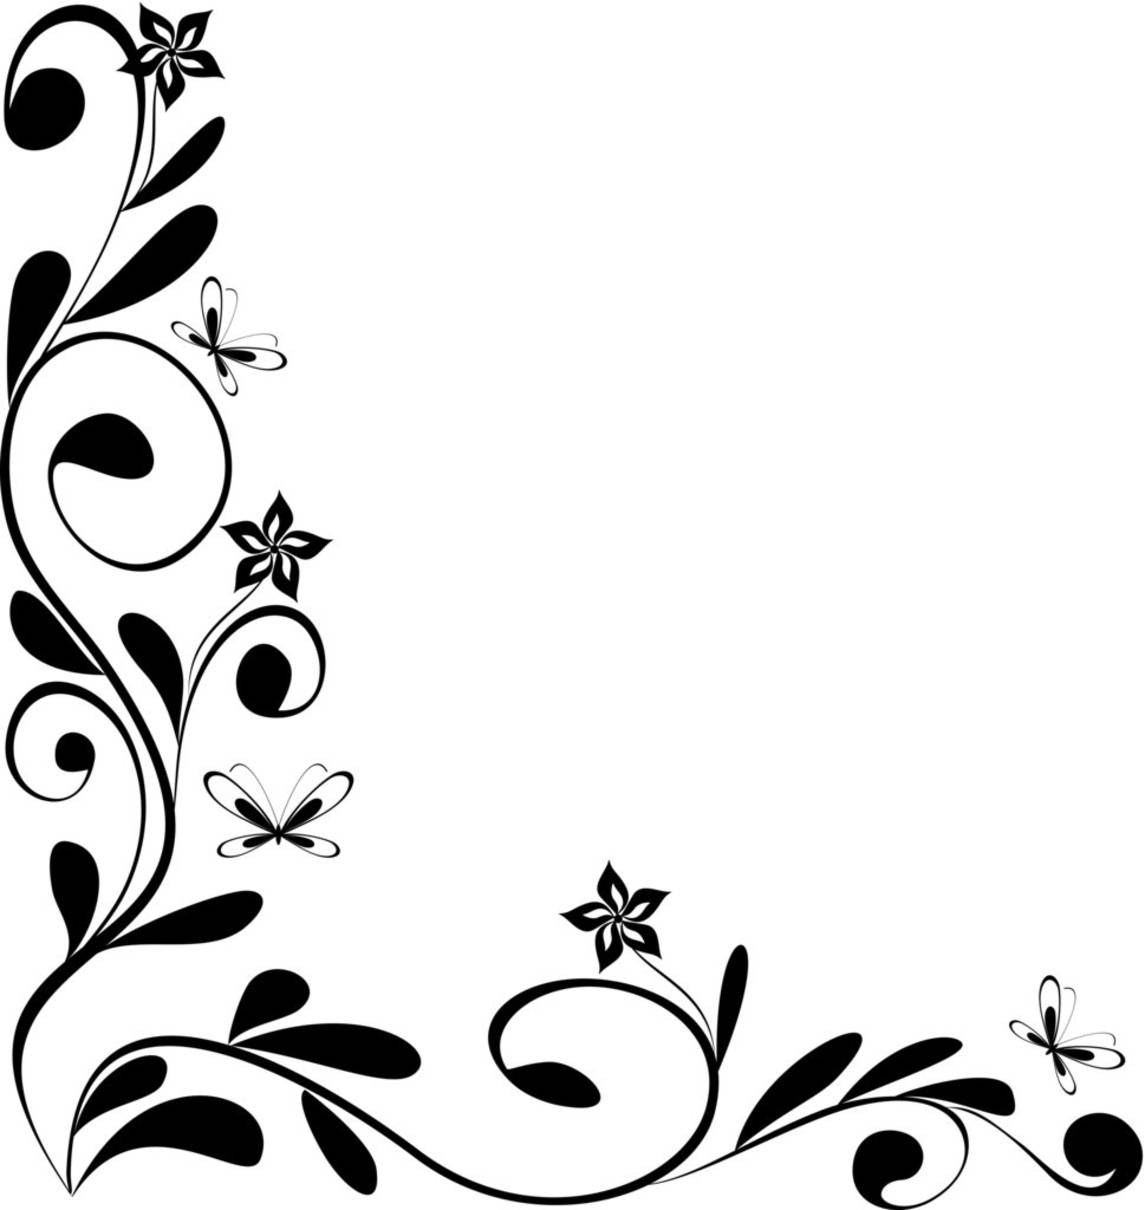 Simple Flower Border Designs To Draw - ClipArt Best